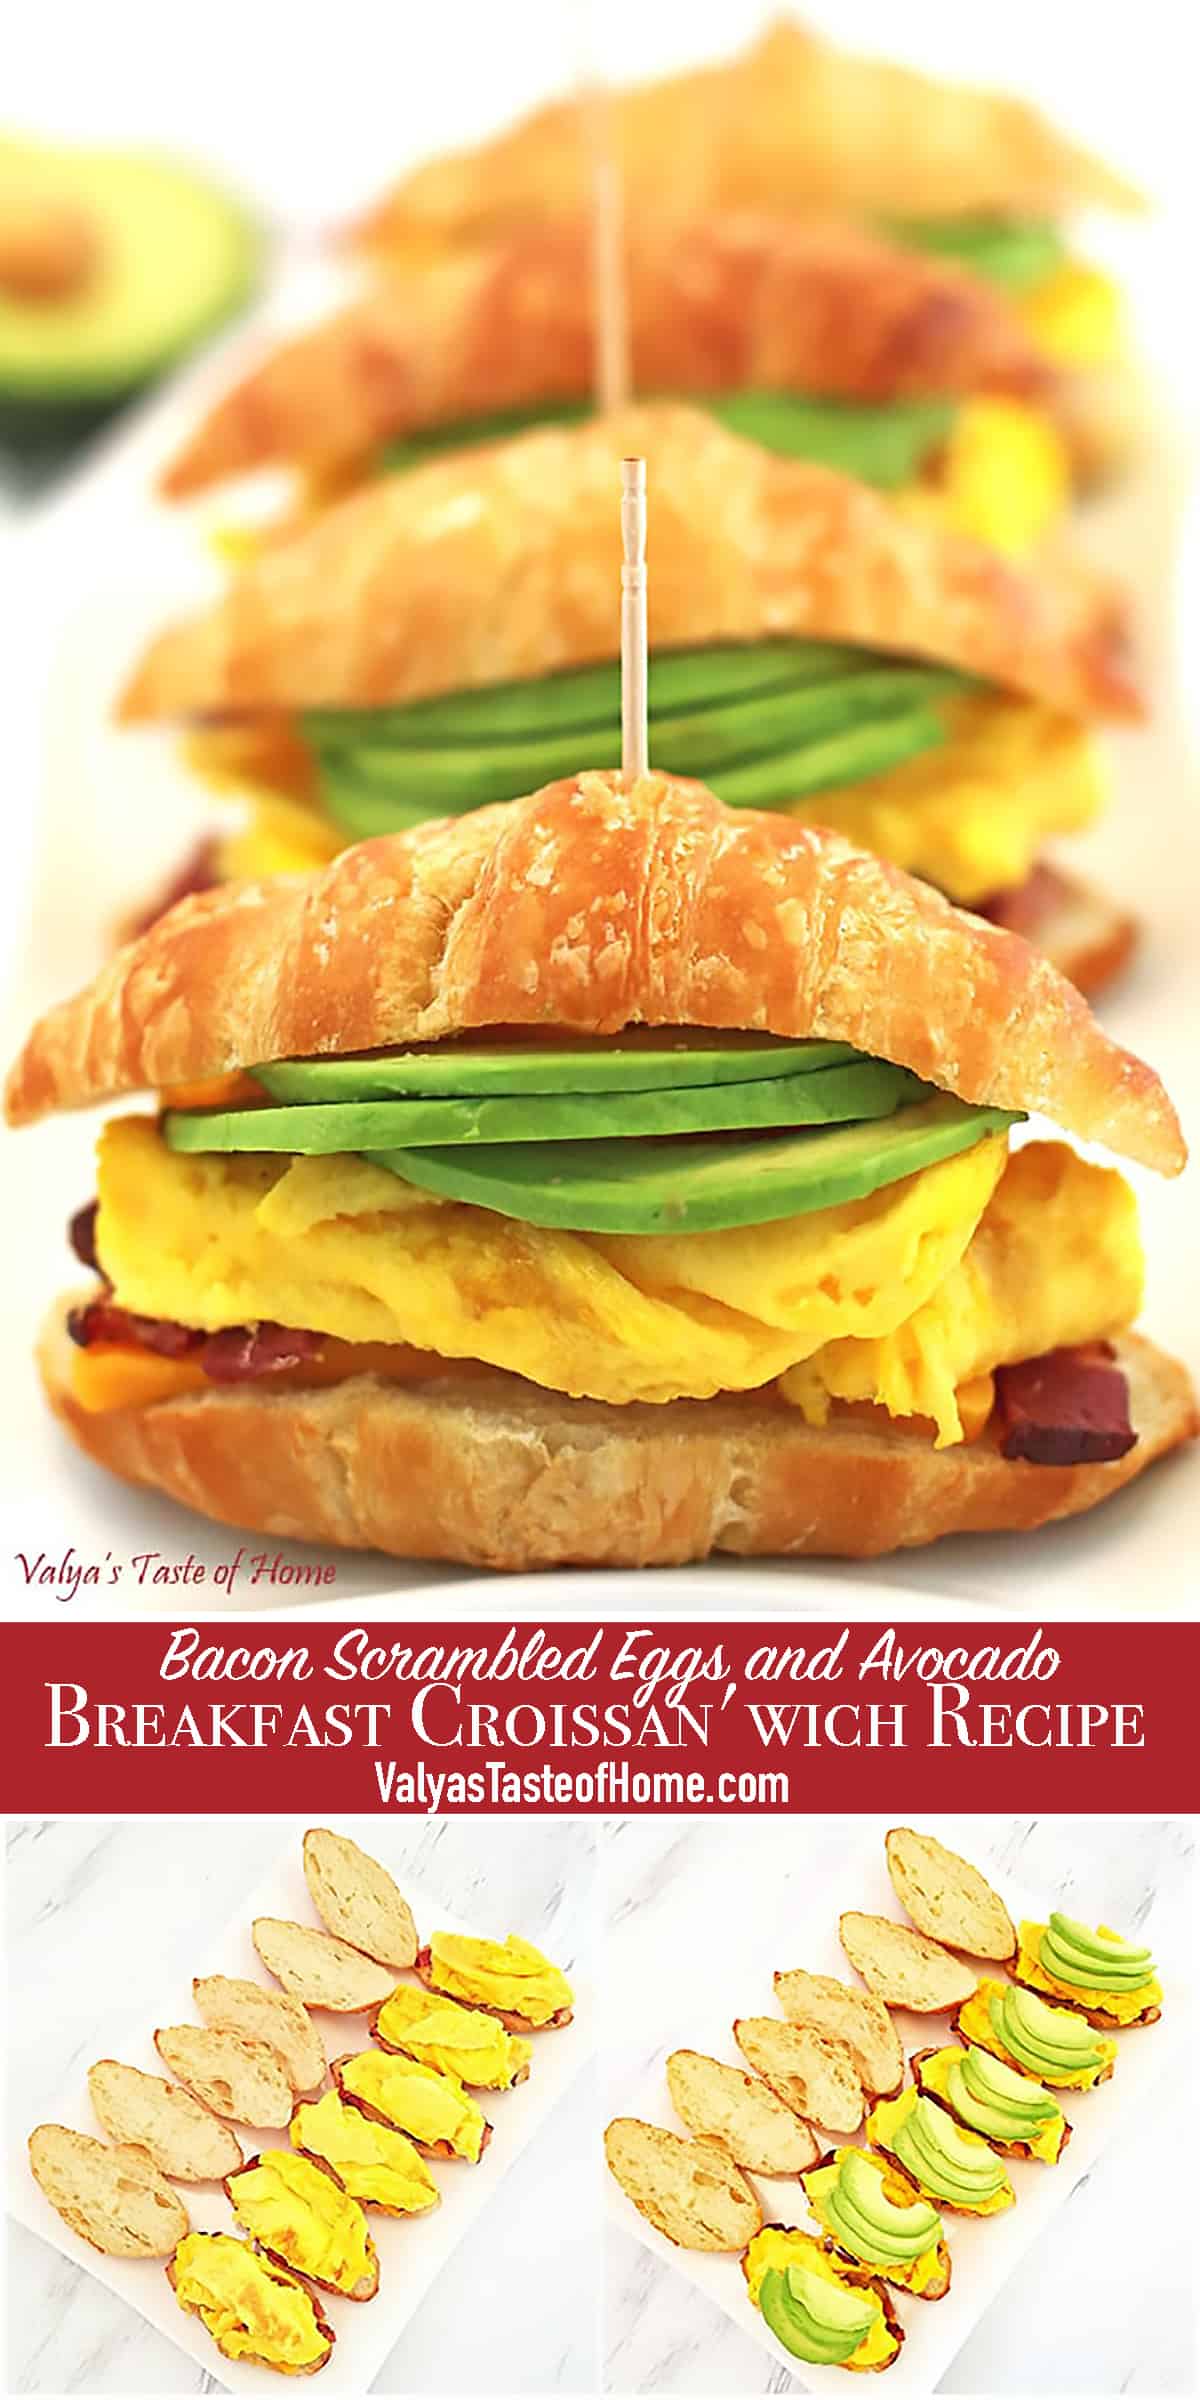 This Bacon Scrambled Eggs and Avocado Breakfast Croissan'wich Recipe is perfect for freezing and warming up in the morning.